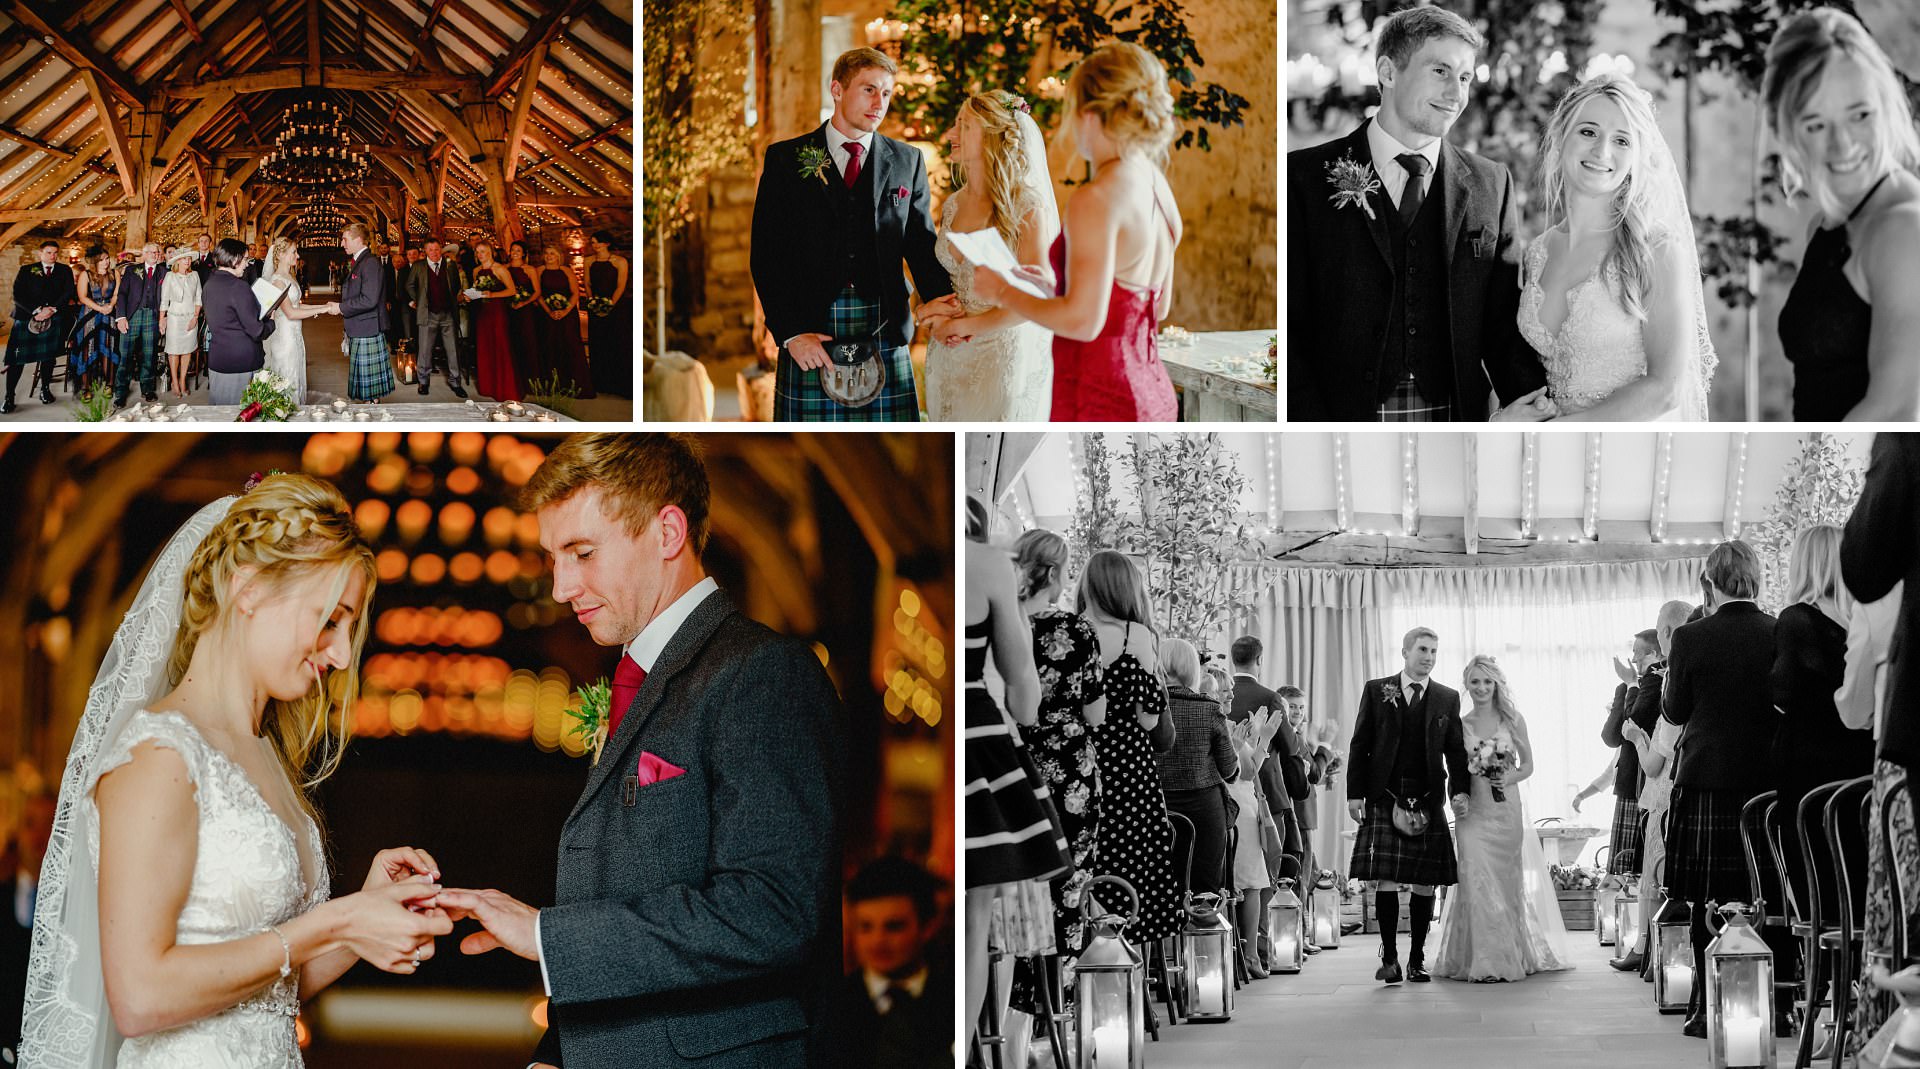 wedding ceremony at the tithe barn at bolton abbey, cripps